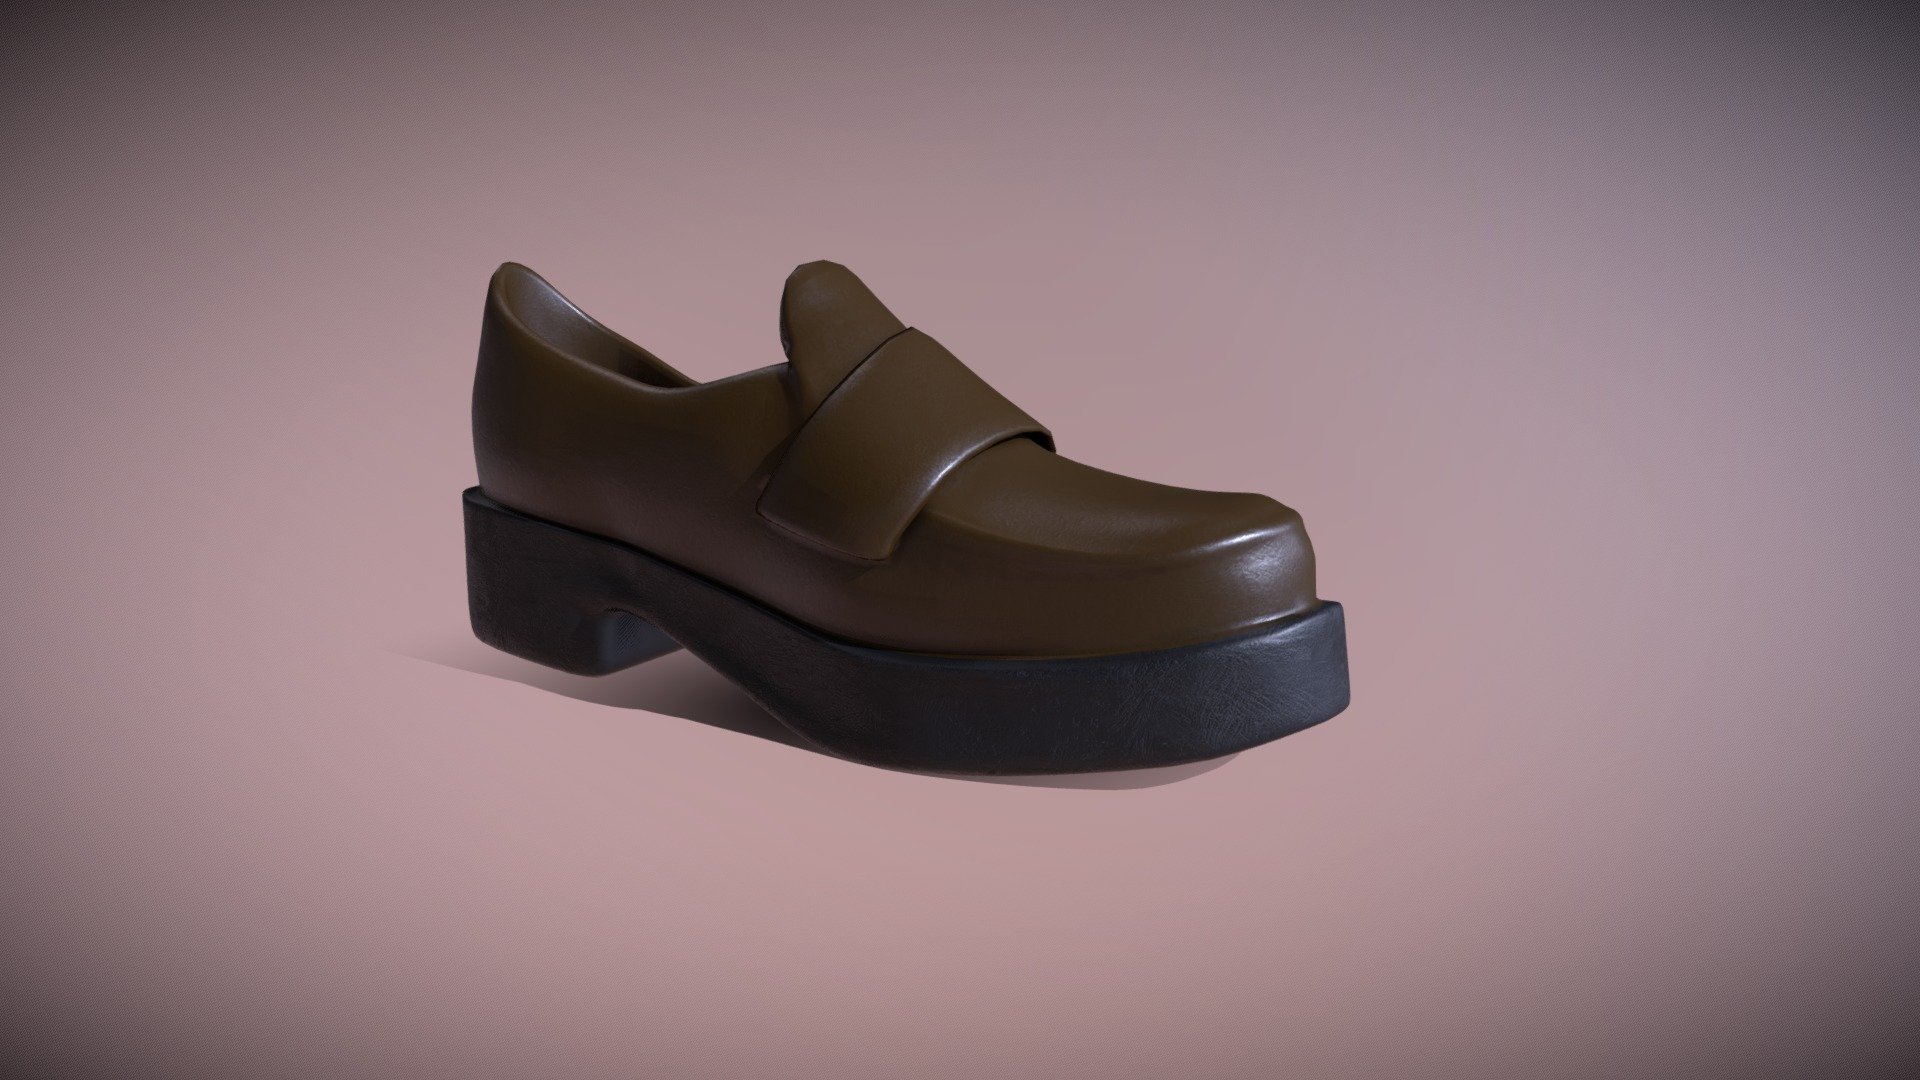 this modes is created with blender 3.0
created by me, so be self to use in your projects - Japanese female shoe - Download Free 3D model by Alone dev games (@cristopher.faundez) 3d model